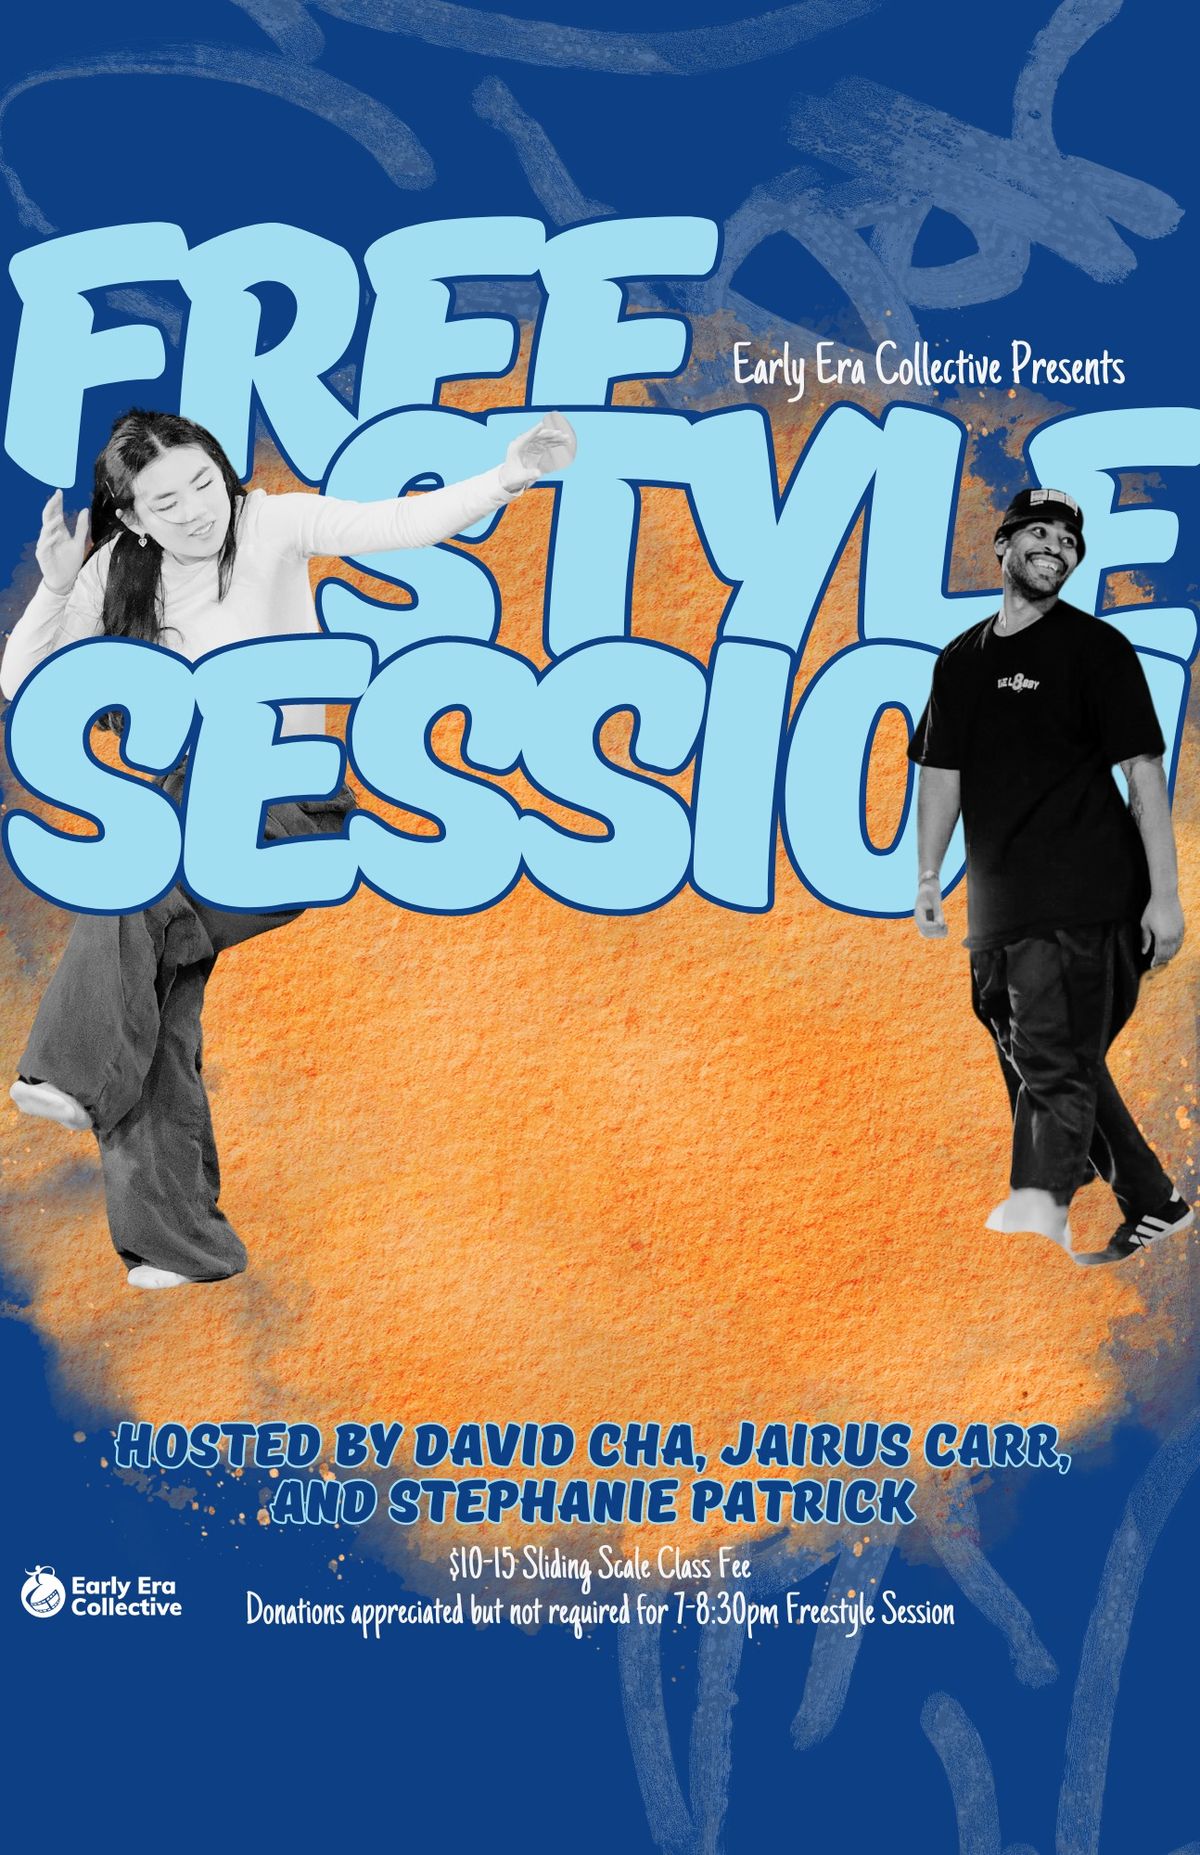 Freestyle Session